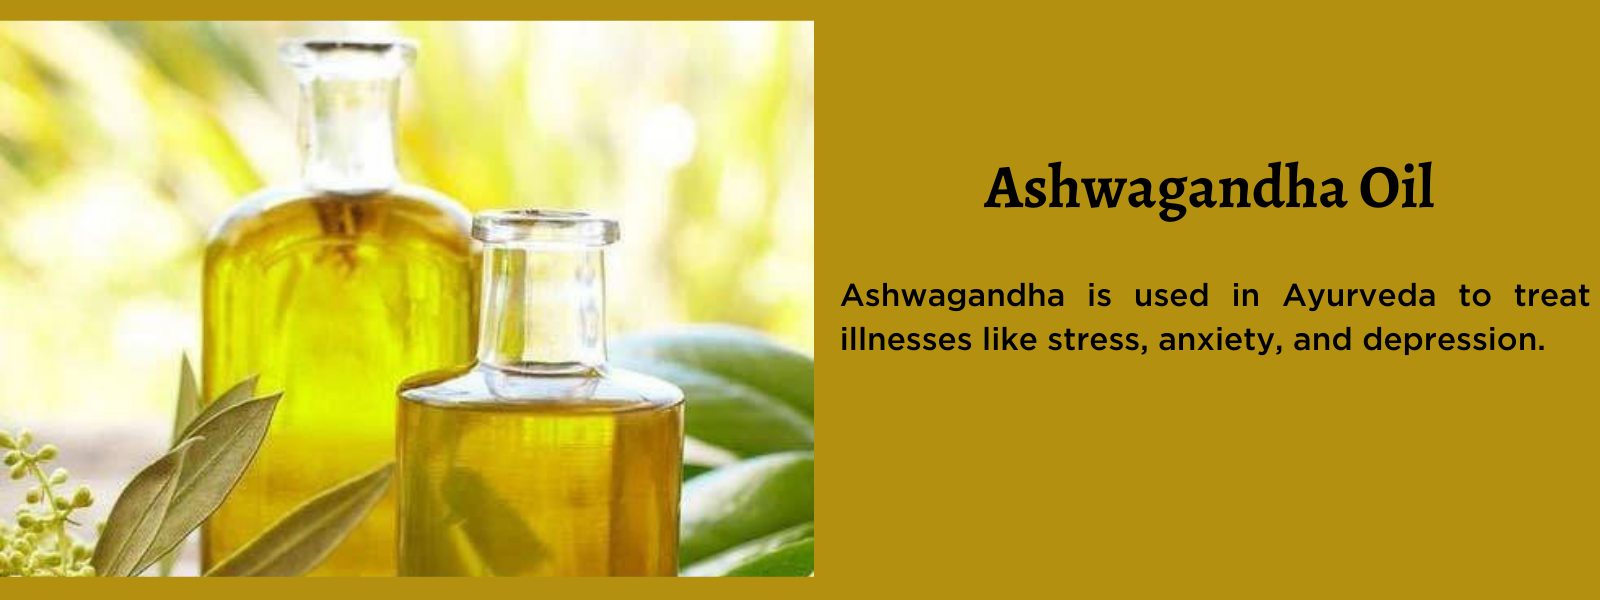 Ashwagandha Oil- Health Benefits, Uses and Important Facts